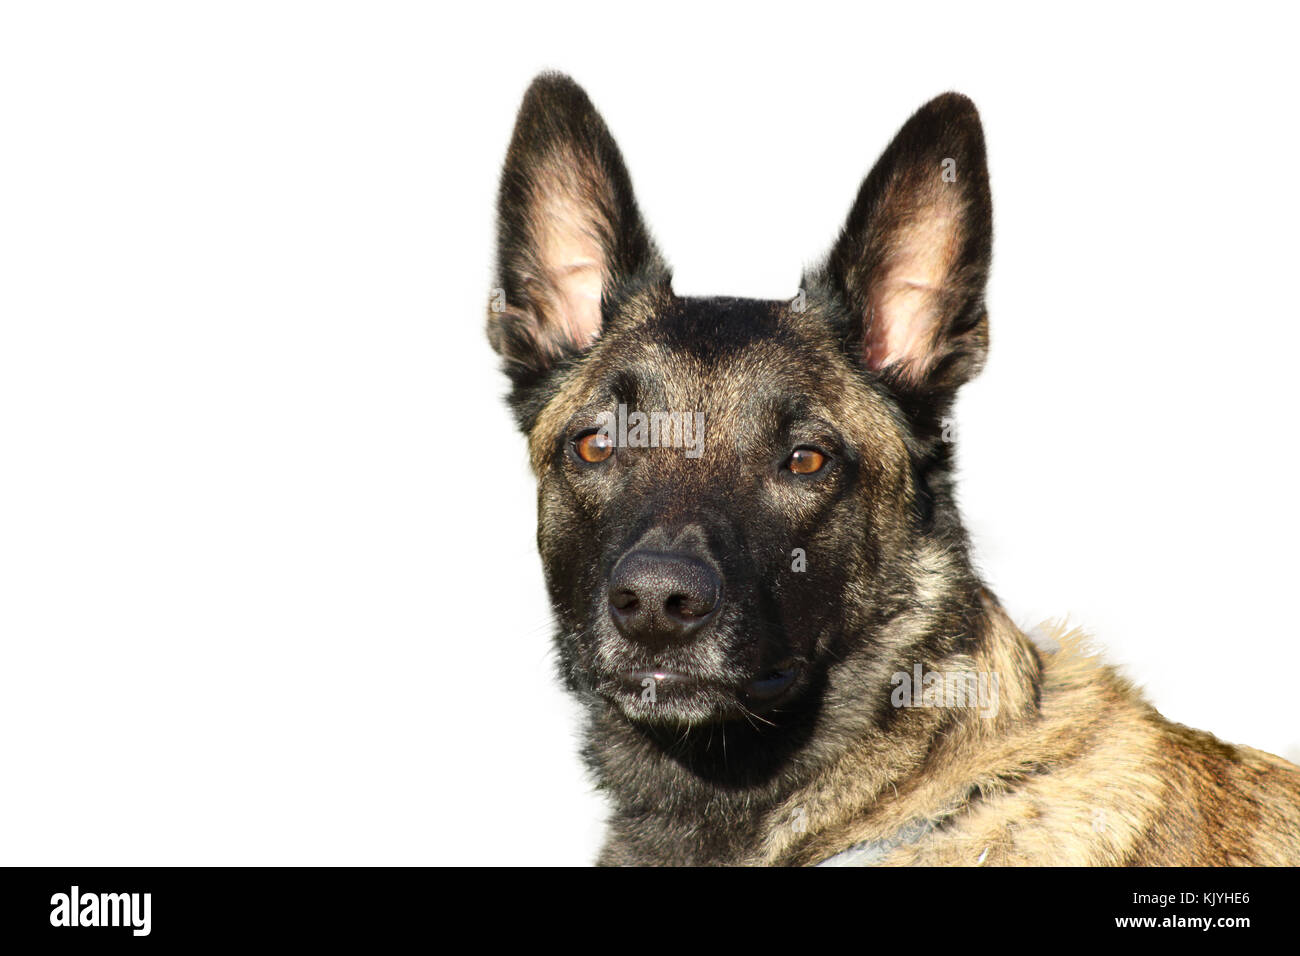 Portrait Of A Belgian Shepherd Dog Malinois Charbonnee With A Proud And Powerful Port Of The Head To The Attentive Glance Stock Photo Alamy